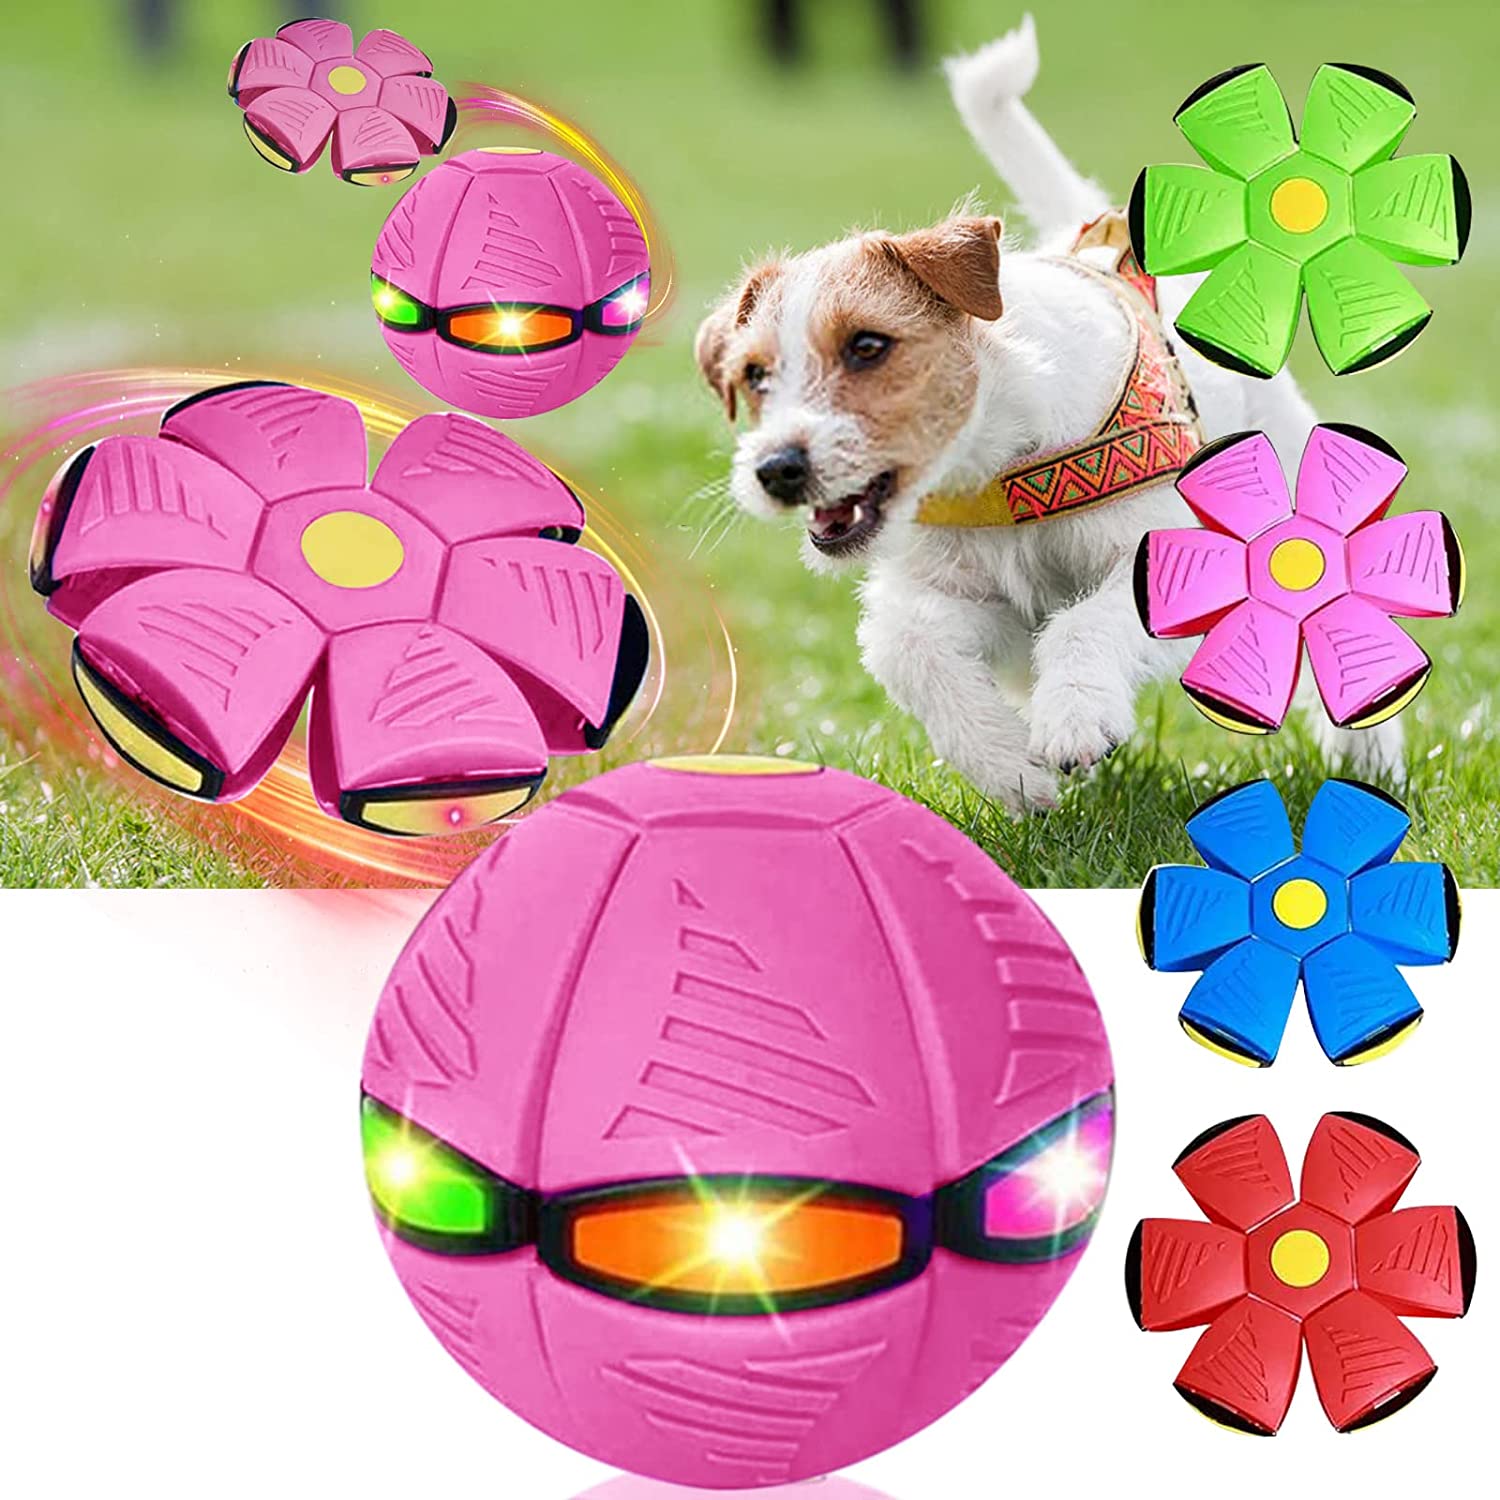 Magic Saucer Dog Toy: Interactive Fun for All Sizes Zydropshipping